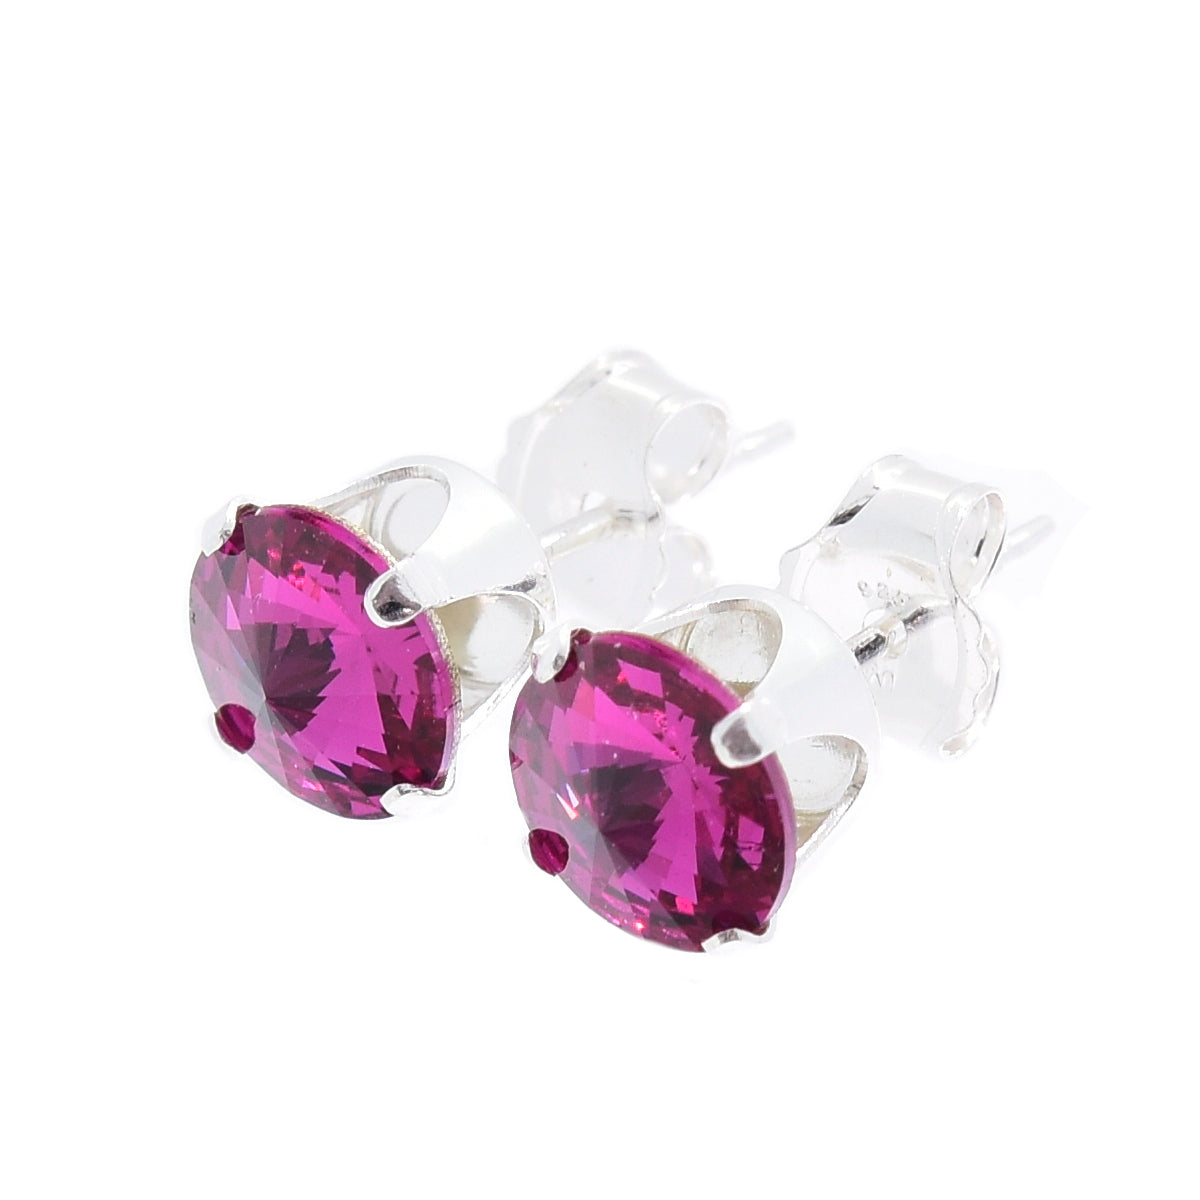 pewterhooter® Women's Classic Collection 925 Sterling silver earrings with brilliant Fuchsia crystals, packaged in a gift box for any occasion.